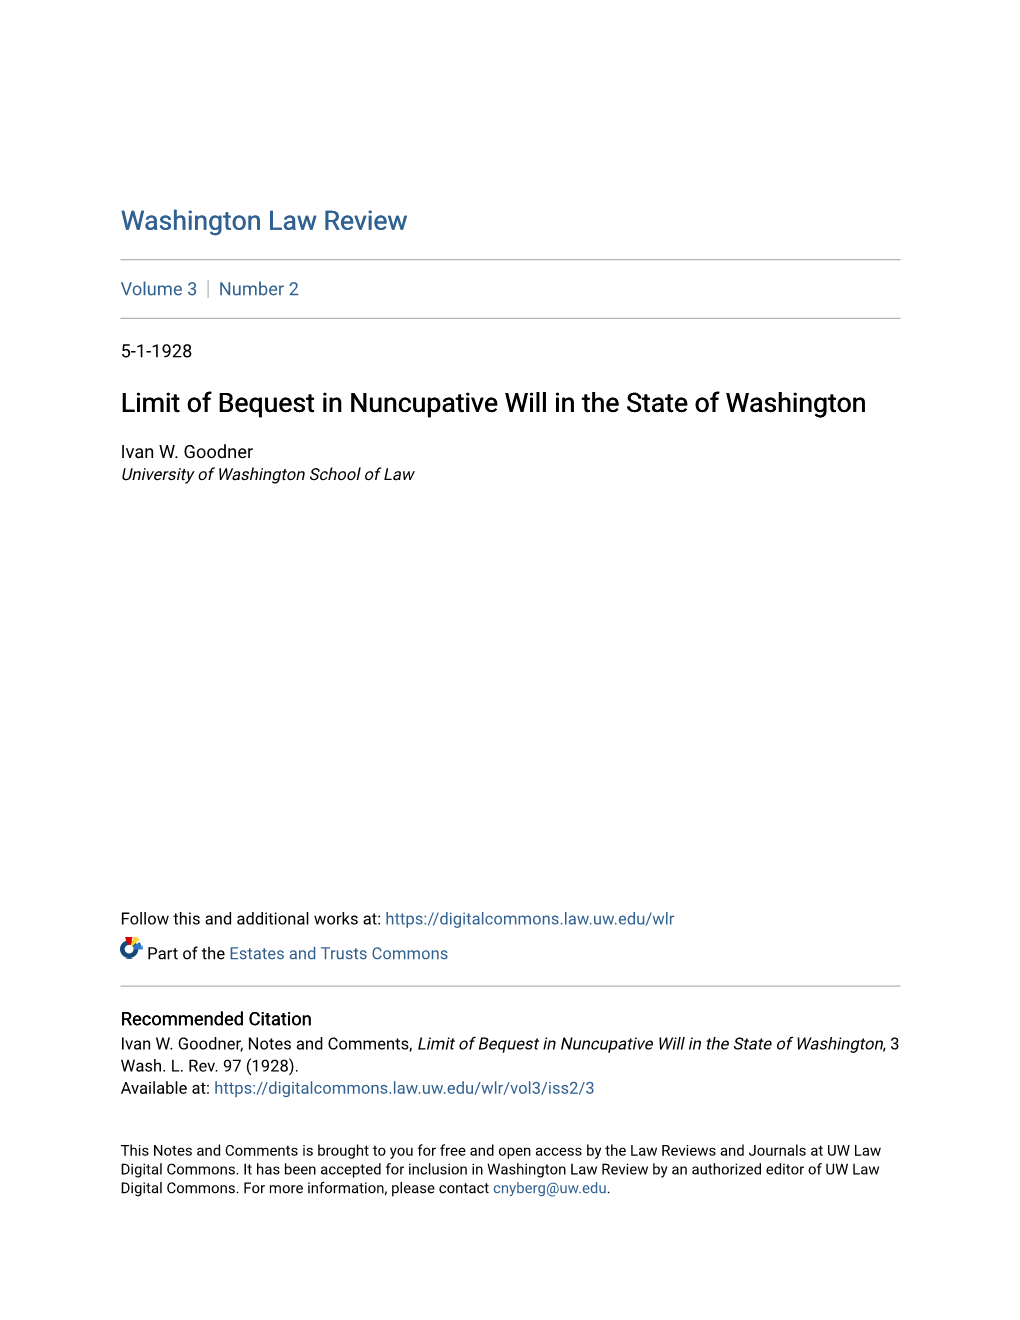 Limit of Bequest in Nuncupative Will in the State of Washington